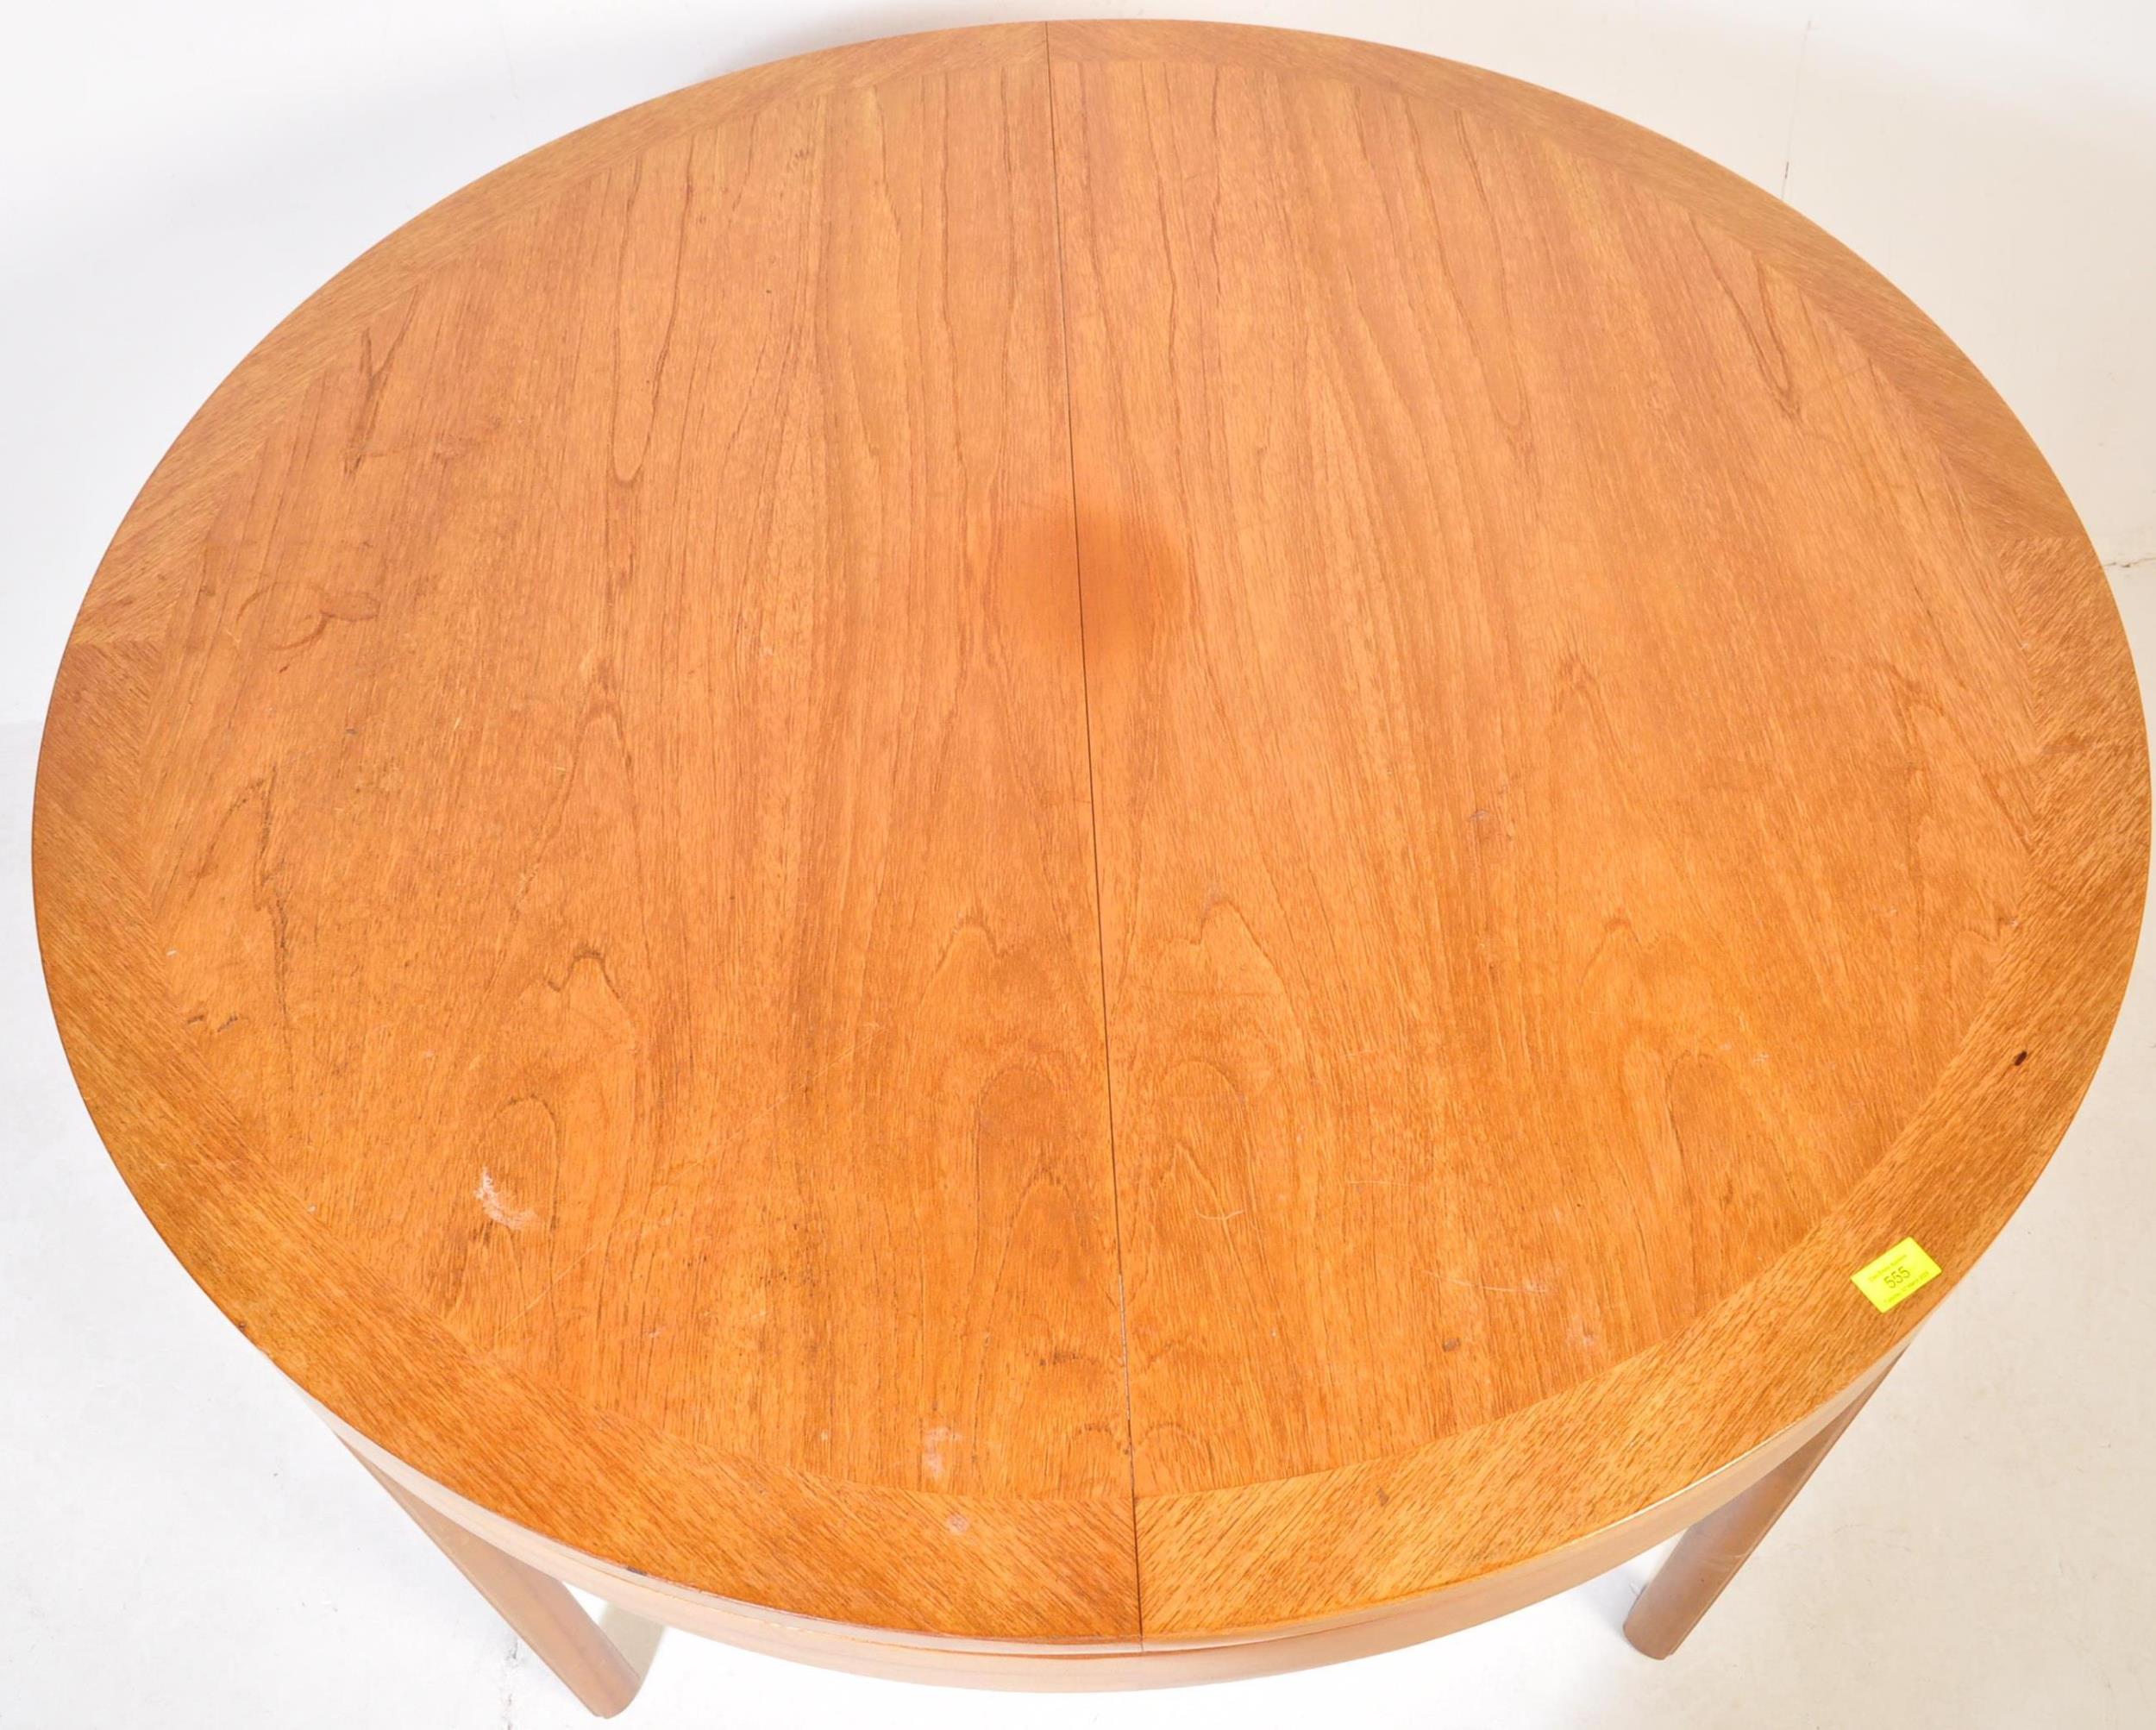 NATHAN FURNITURE - TEAK EXTENDING ROUND DINING TABLE - Image 3 of 5